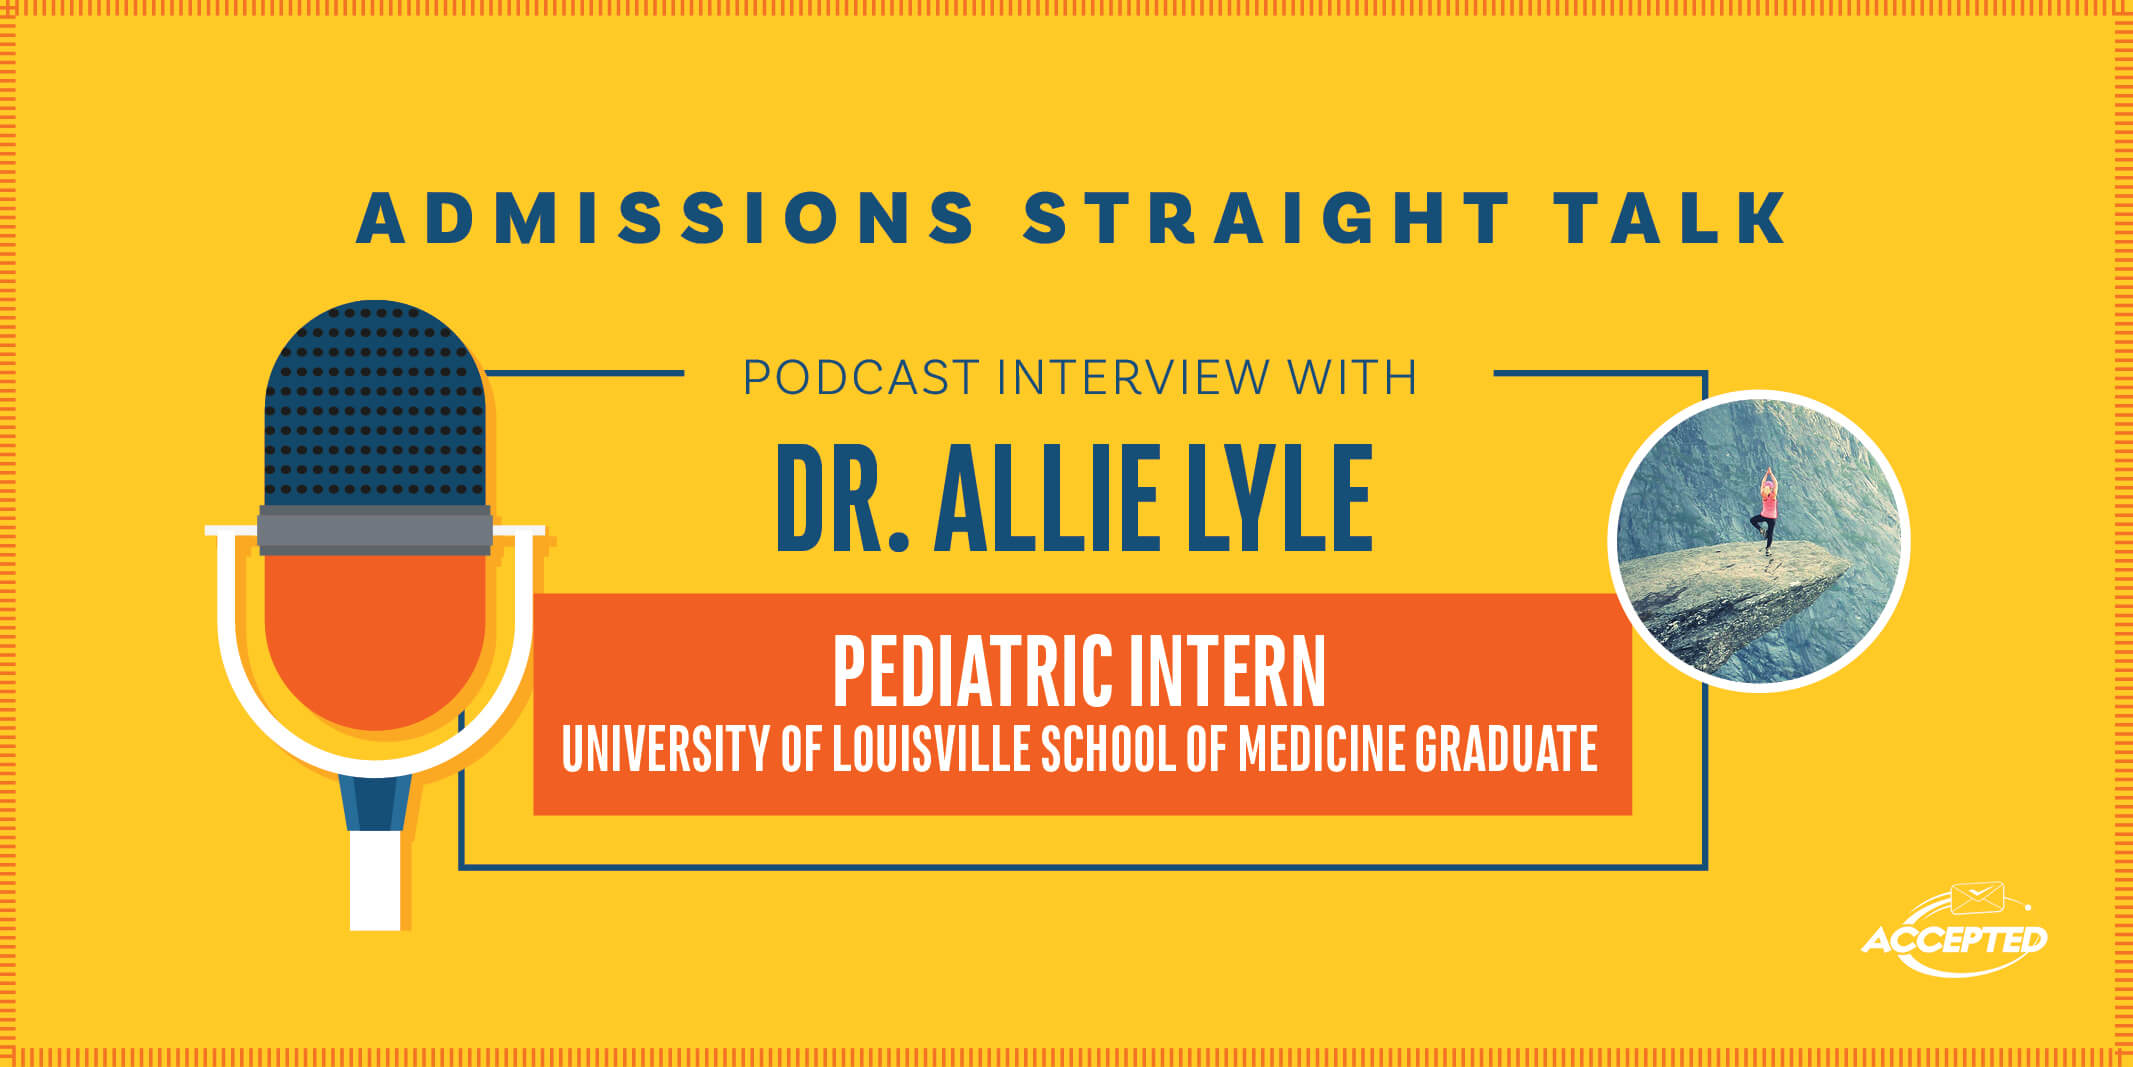 Podcast Interview with Dr. Allie Lyle , currently a Pediatric Intern and mom - initially rejected from Med school 3 times! 